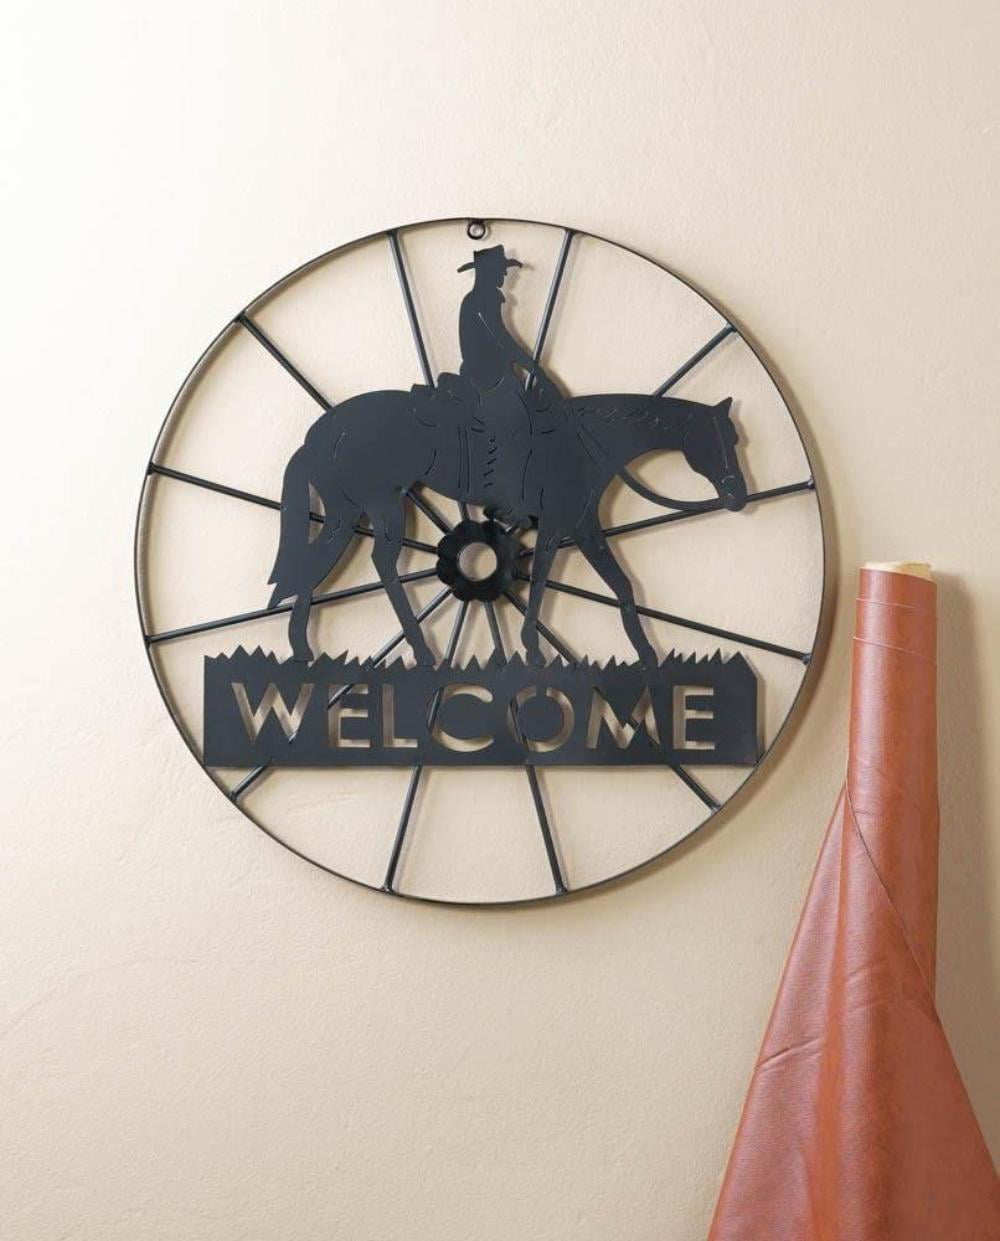 Details about   Rustic Home Decor Cowboy Life Themed Welcome Signs Metal Lodge Cabin Horse 